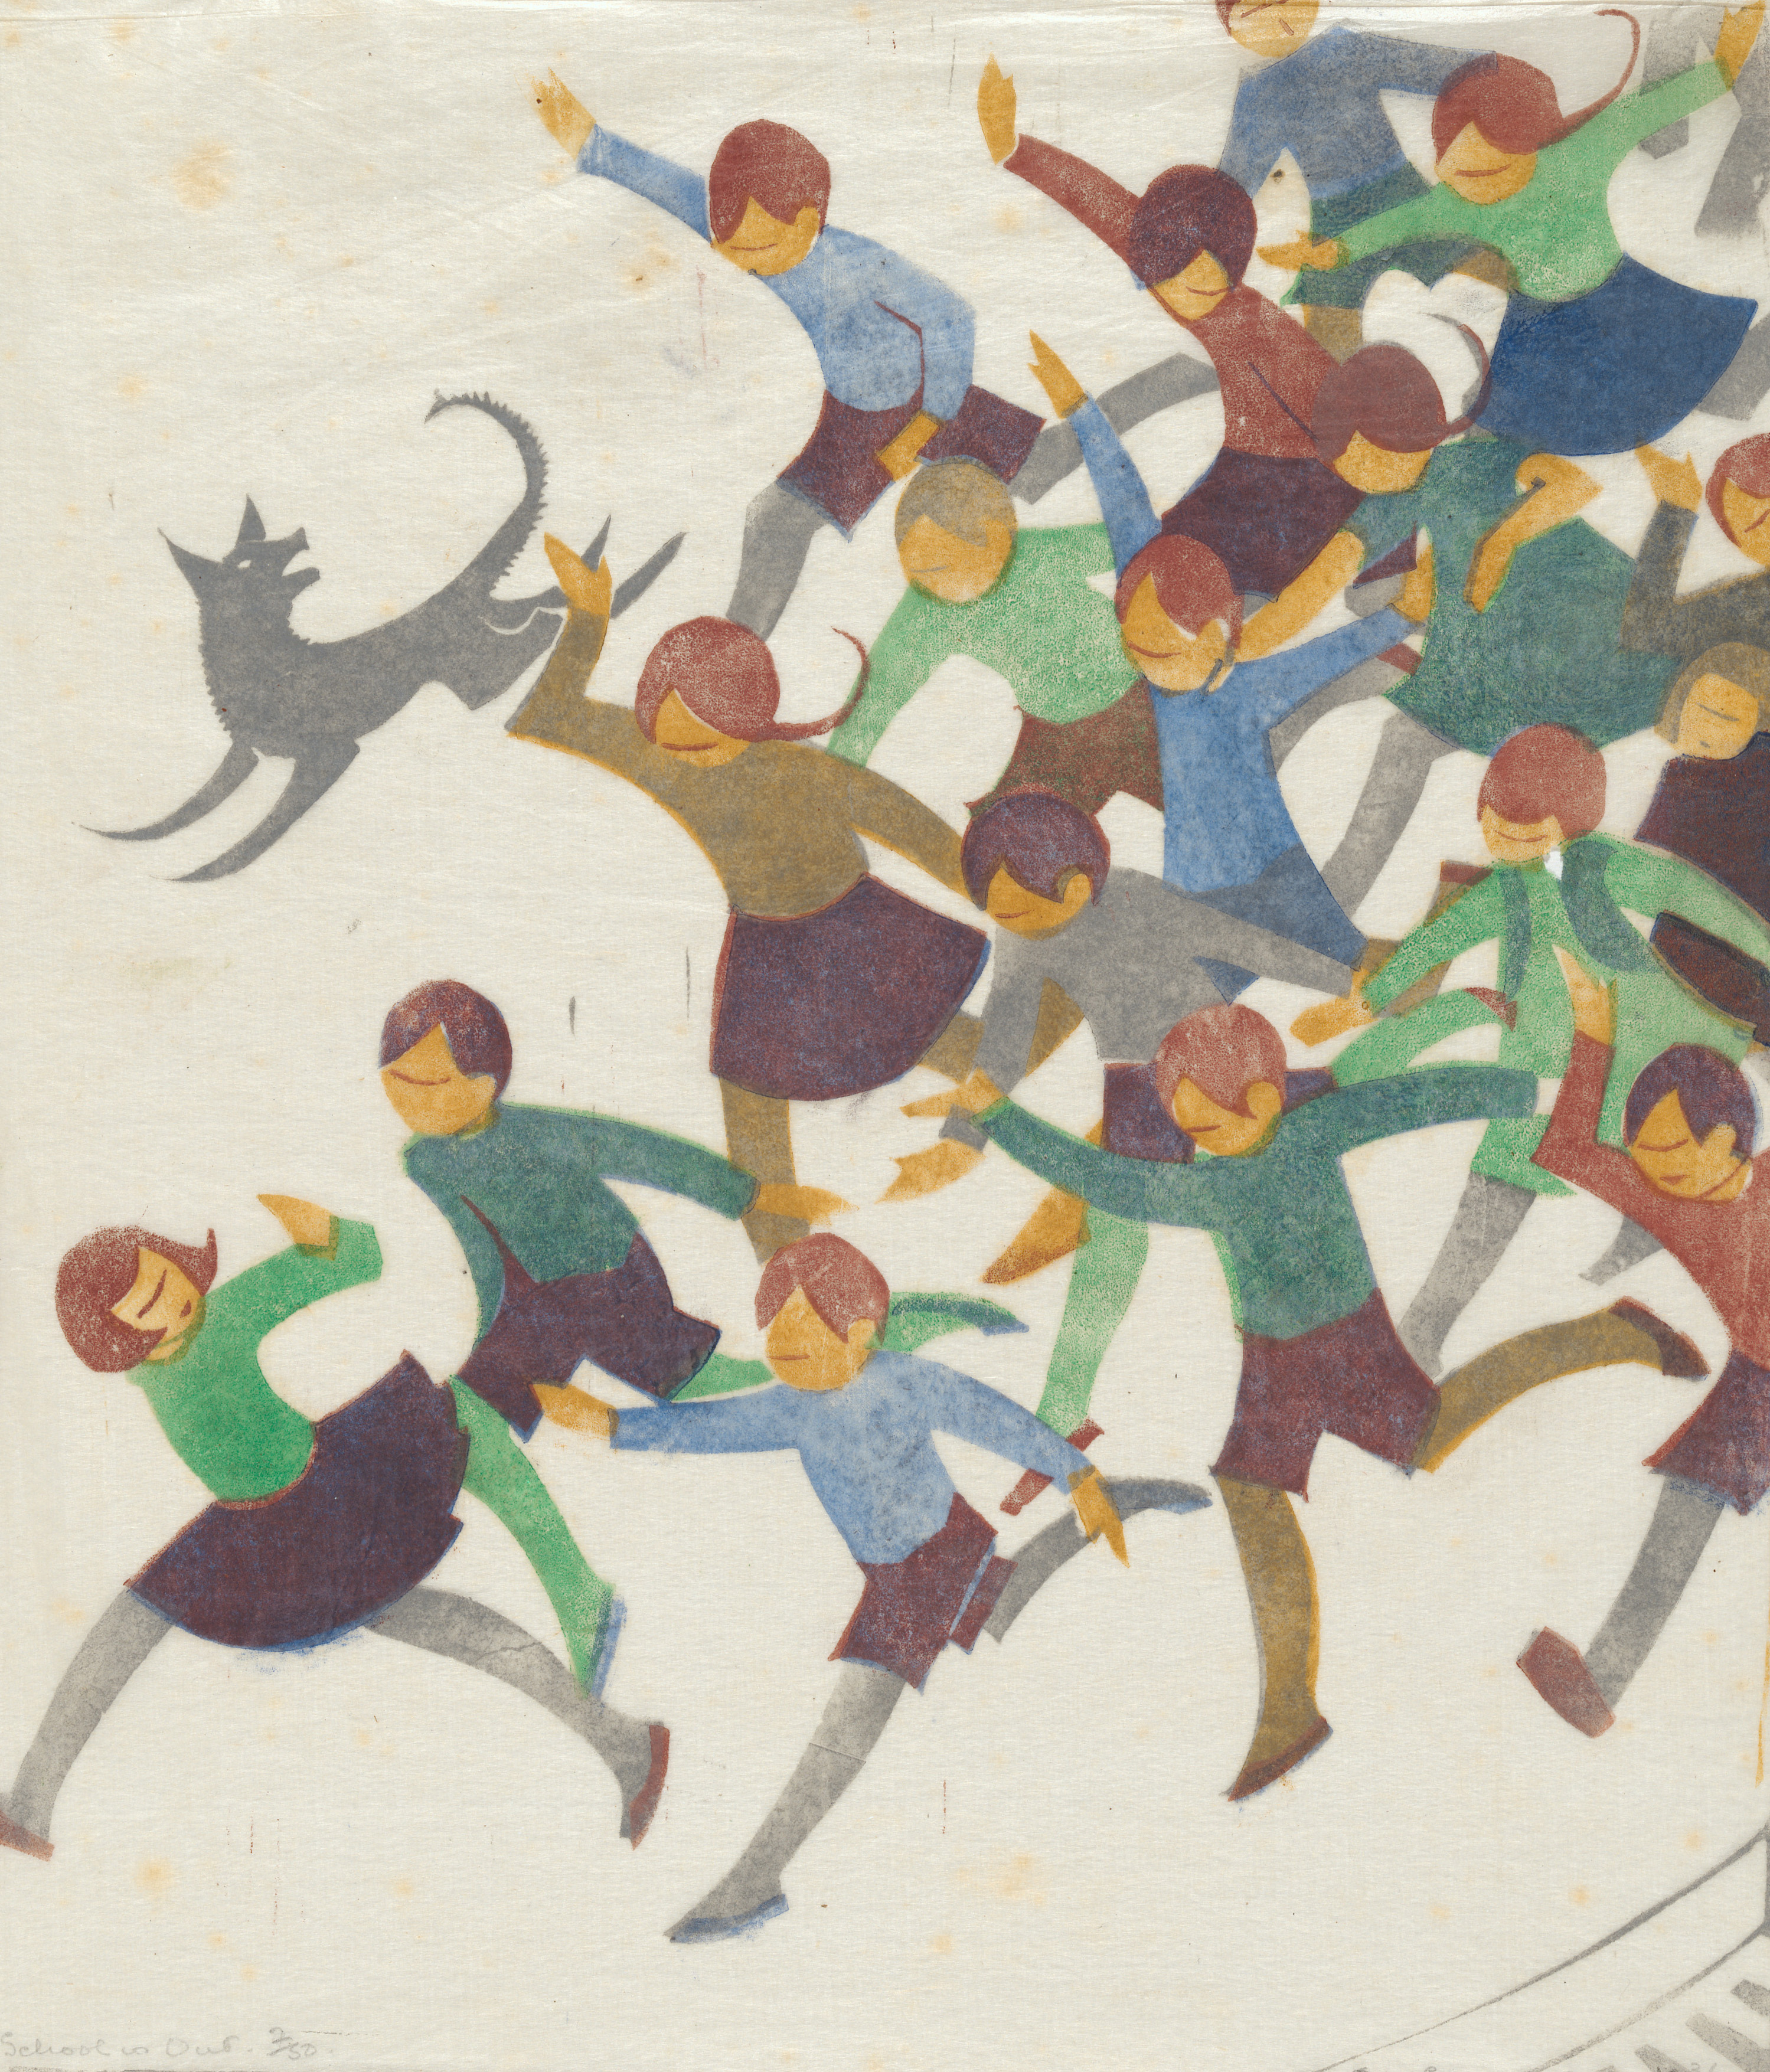 Ethel Spowers, School is out, 1936, linocut, printed in colour inks, from five blocks, National Gallery of Australia, Kamberri/Canberra, purchased 1976